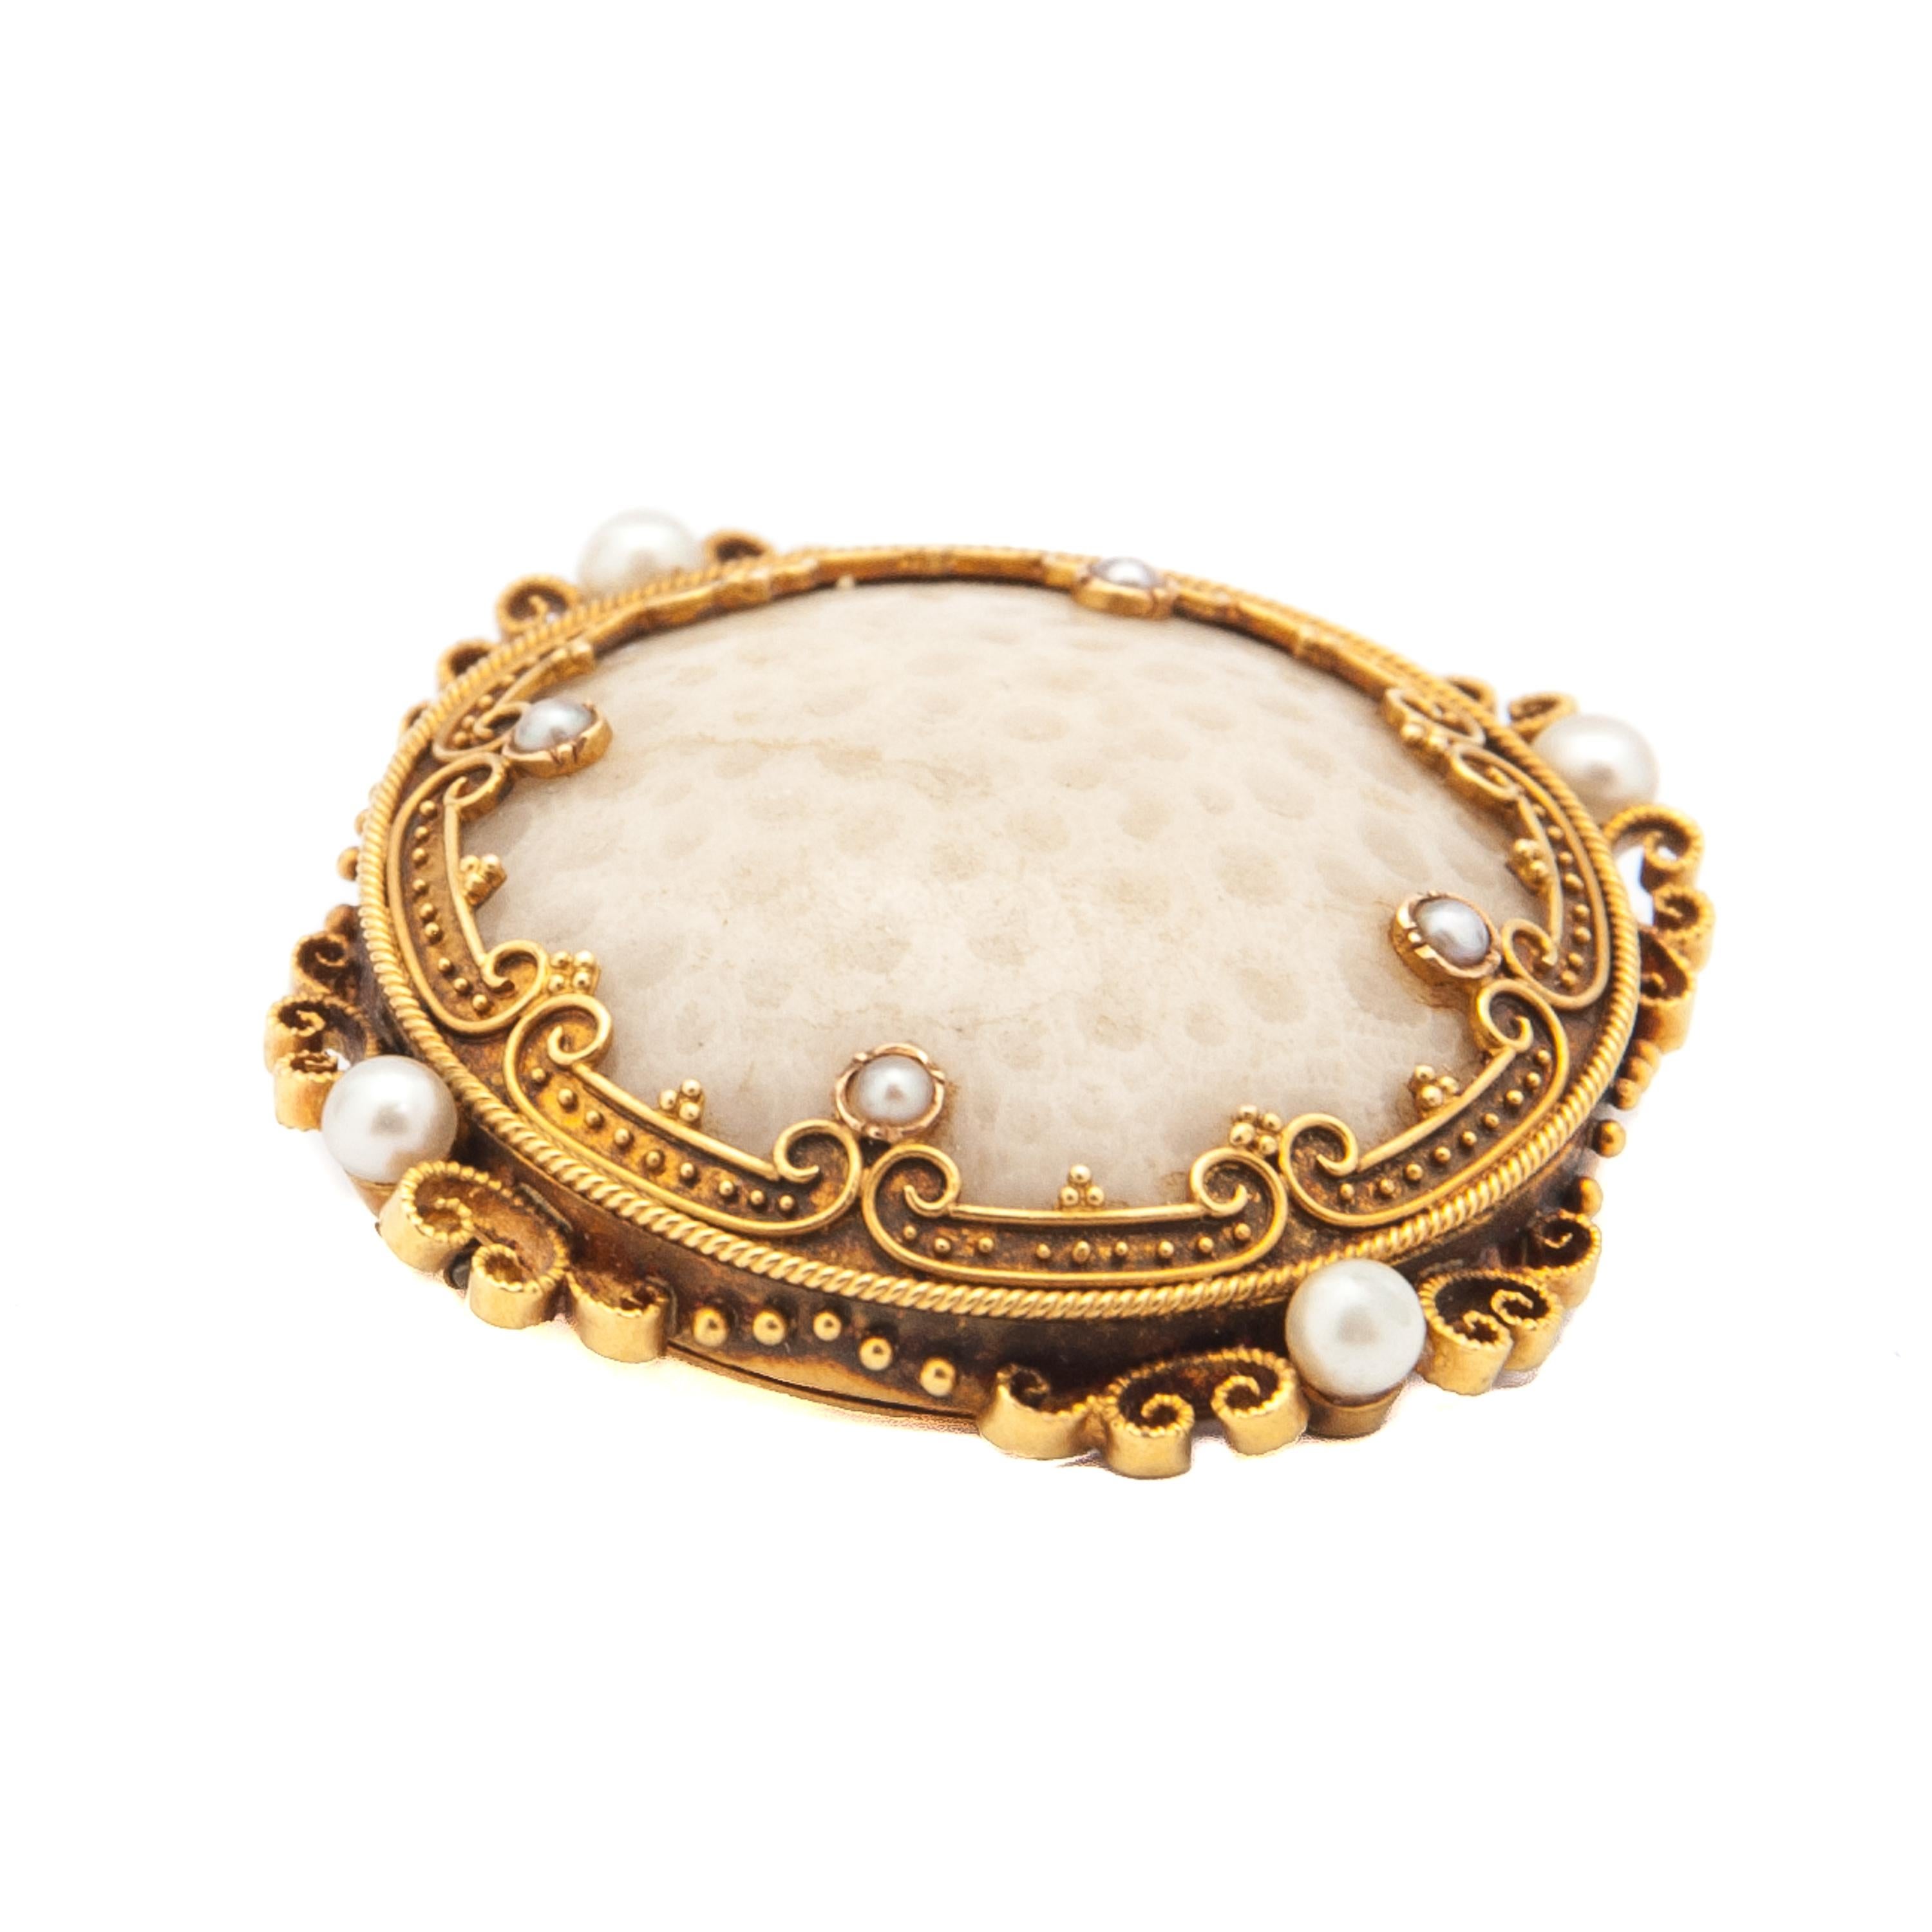 This is an antique 19th century fossilized white coral brooch set with eight seed pearls. The fossilized coral and pearls are set in an 18 karat gold round worked frame. The frame of the brooch is designed with a rope motif, curls and pearls,